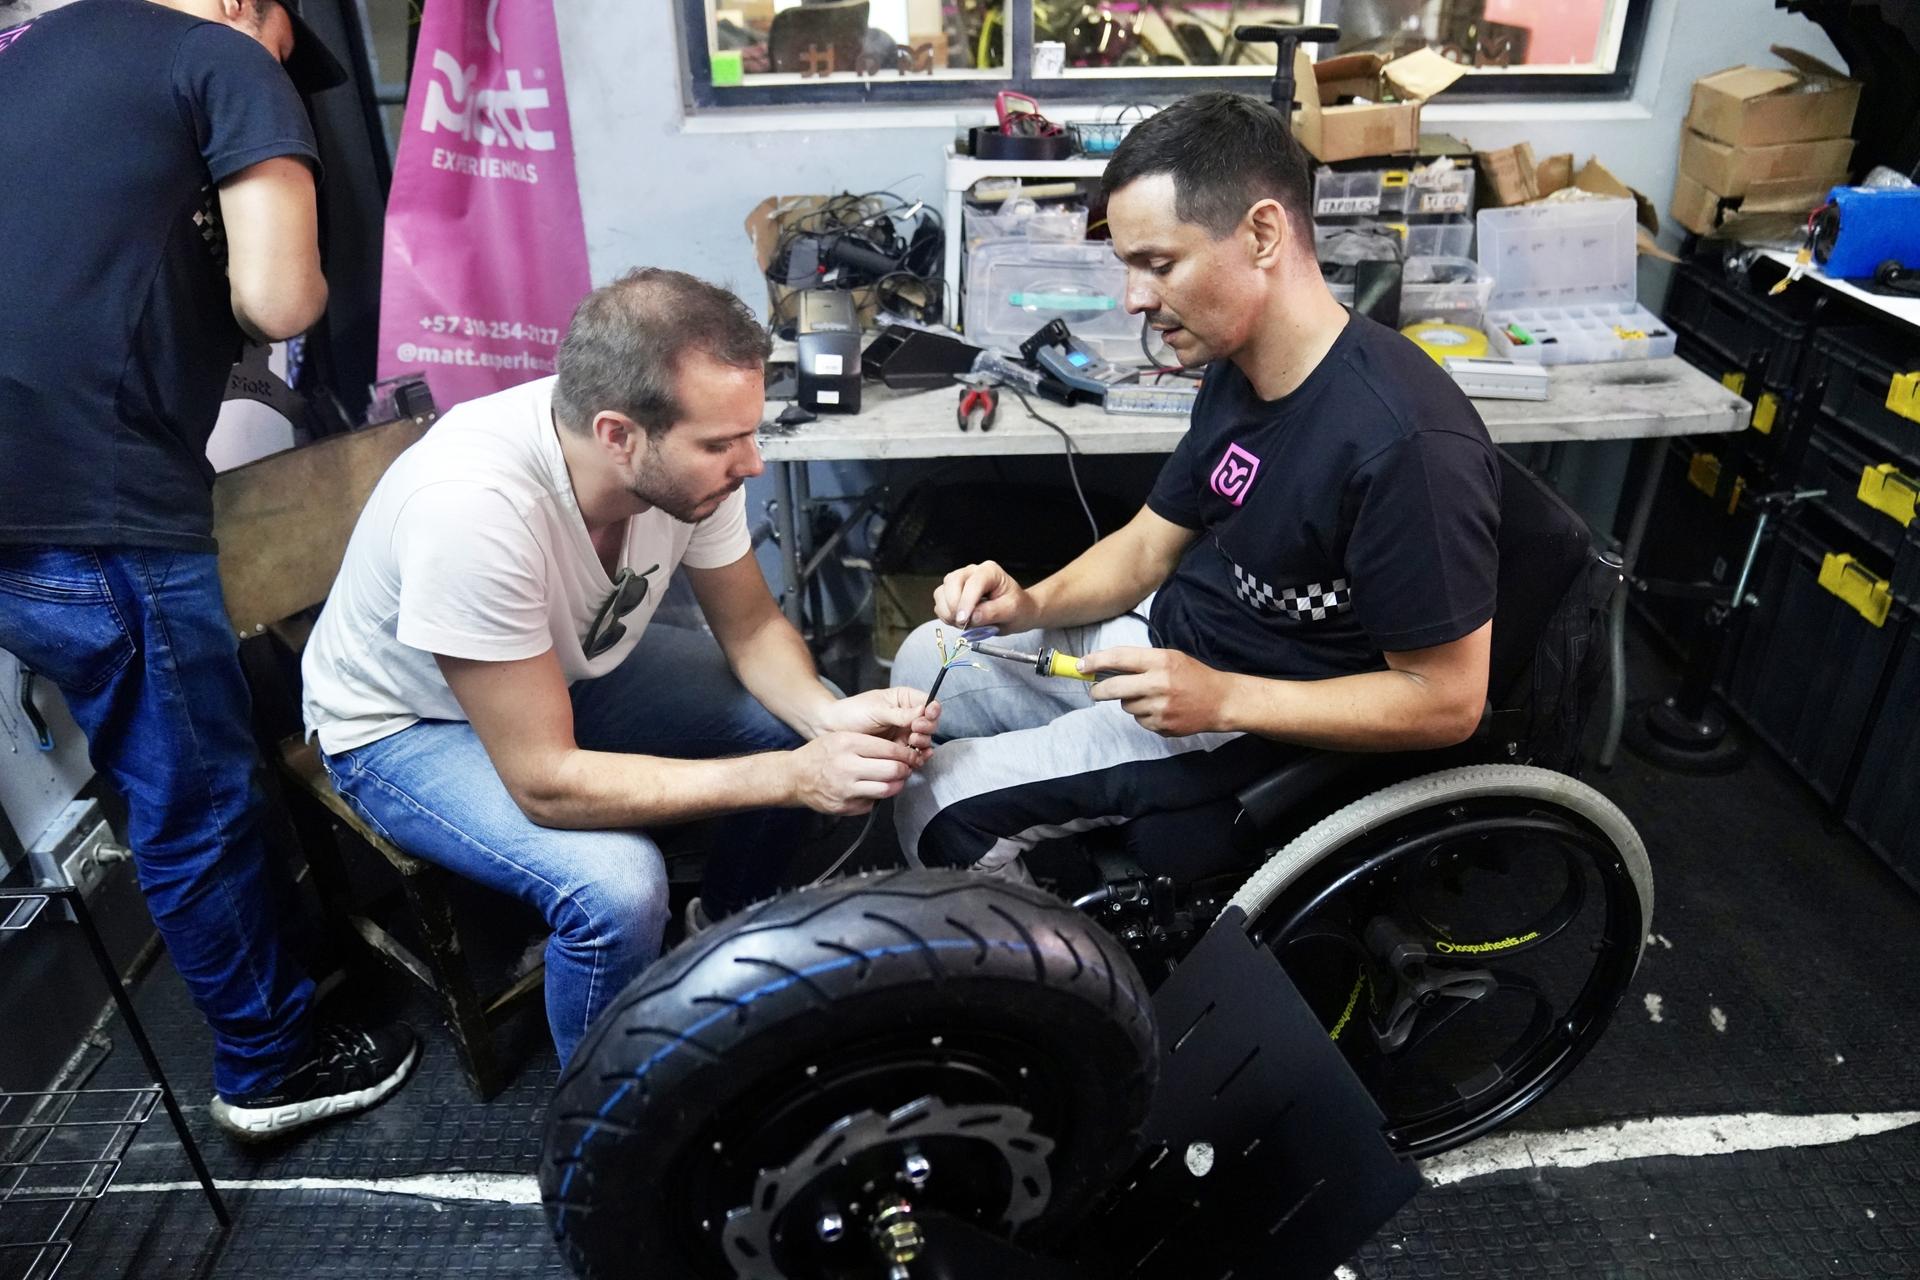 A man in a white shirt and jeans fixing an electric wheelchair that a man in a black shirt is sitting in.